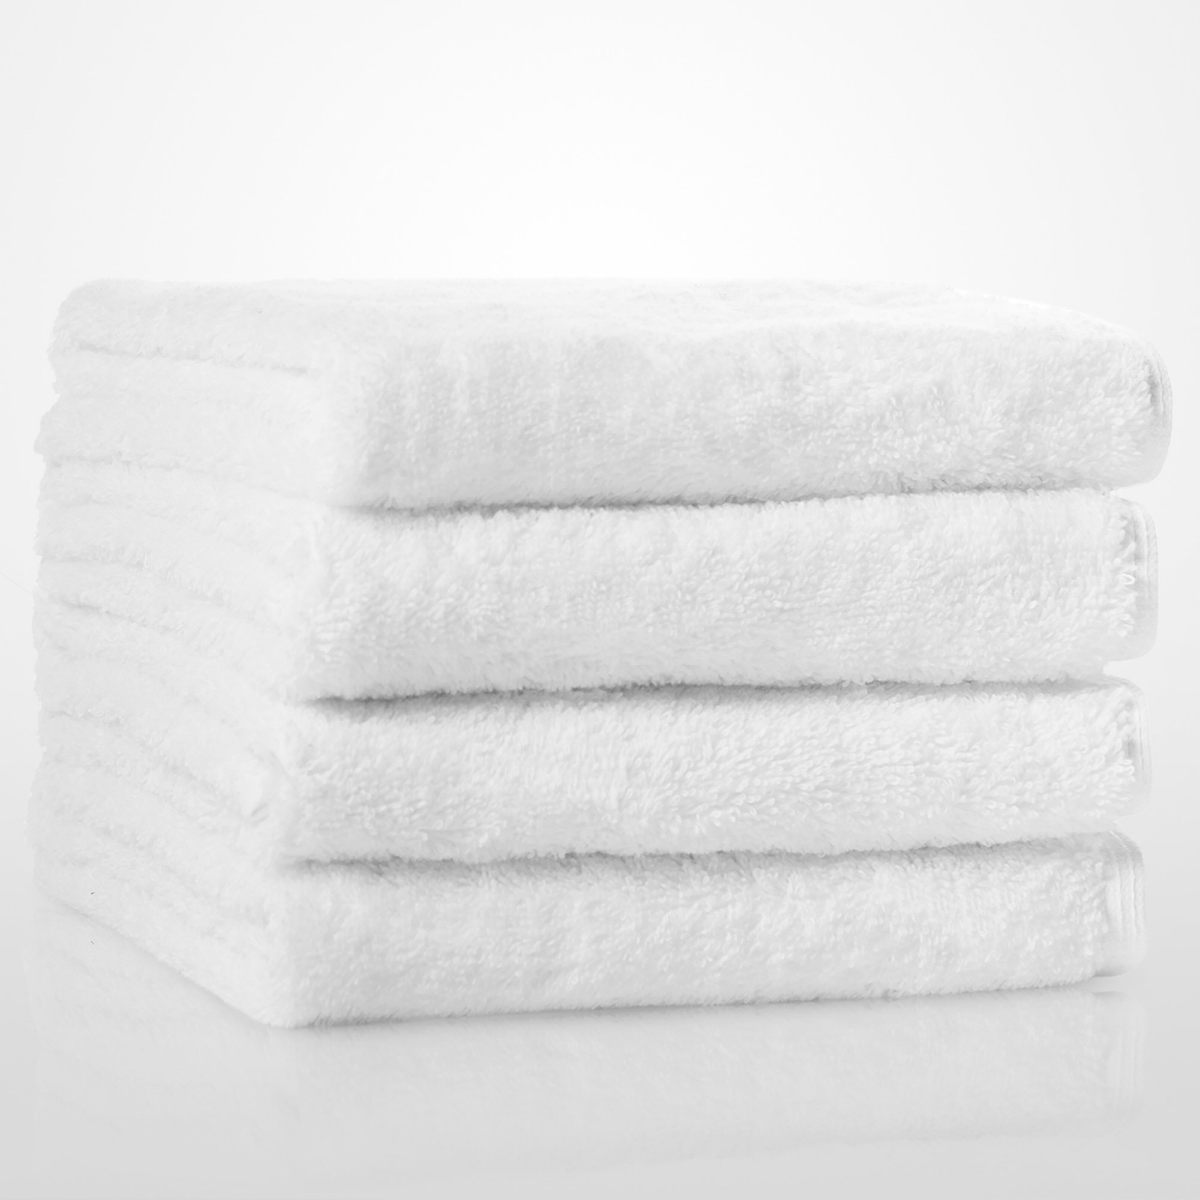 High quality Towel : How to choose a small towel in a hotel